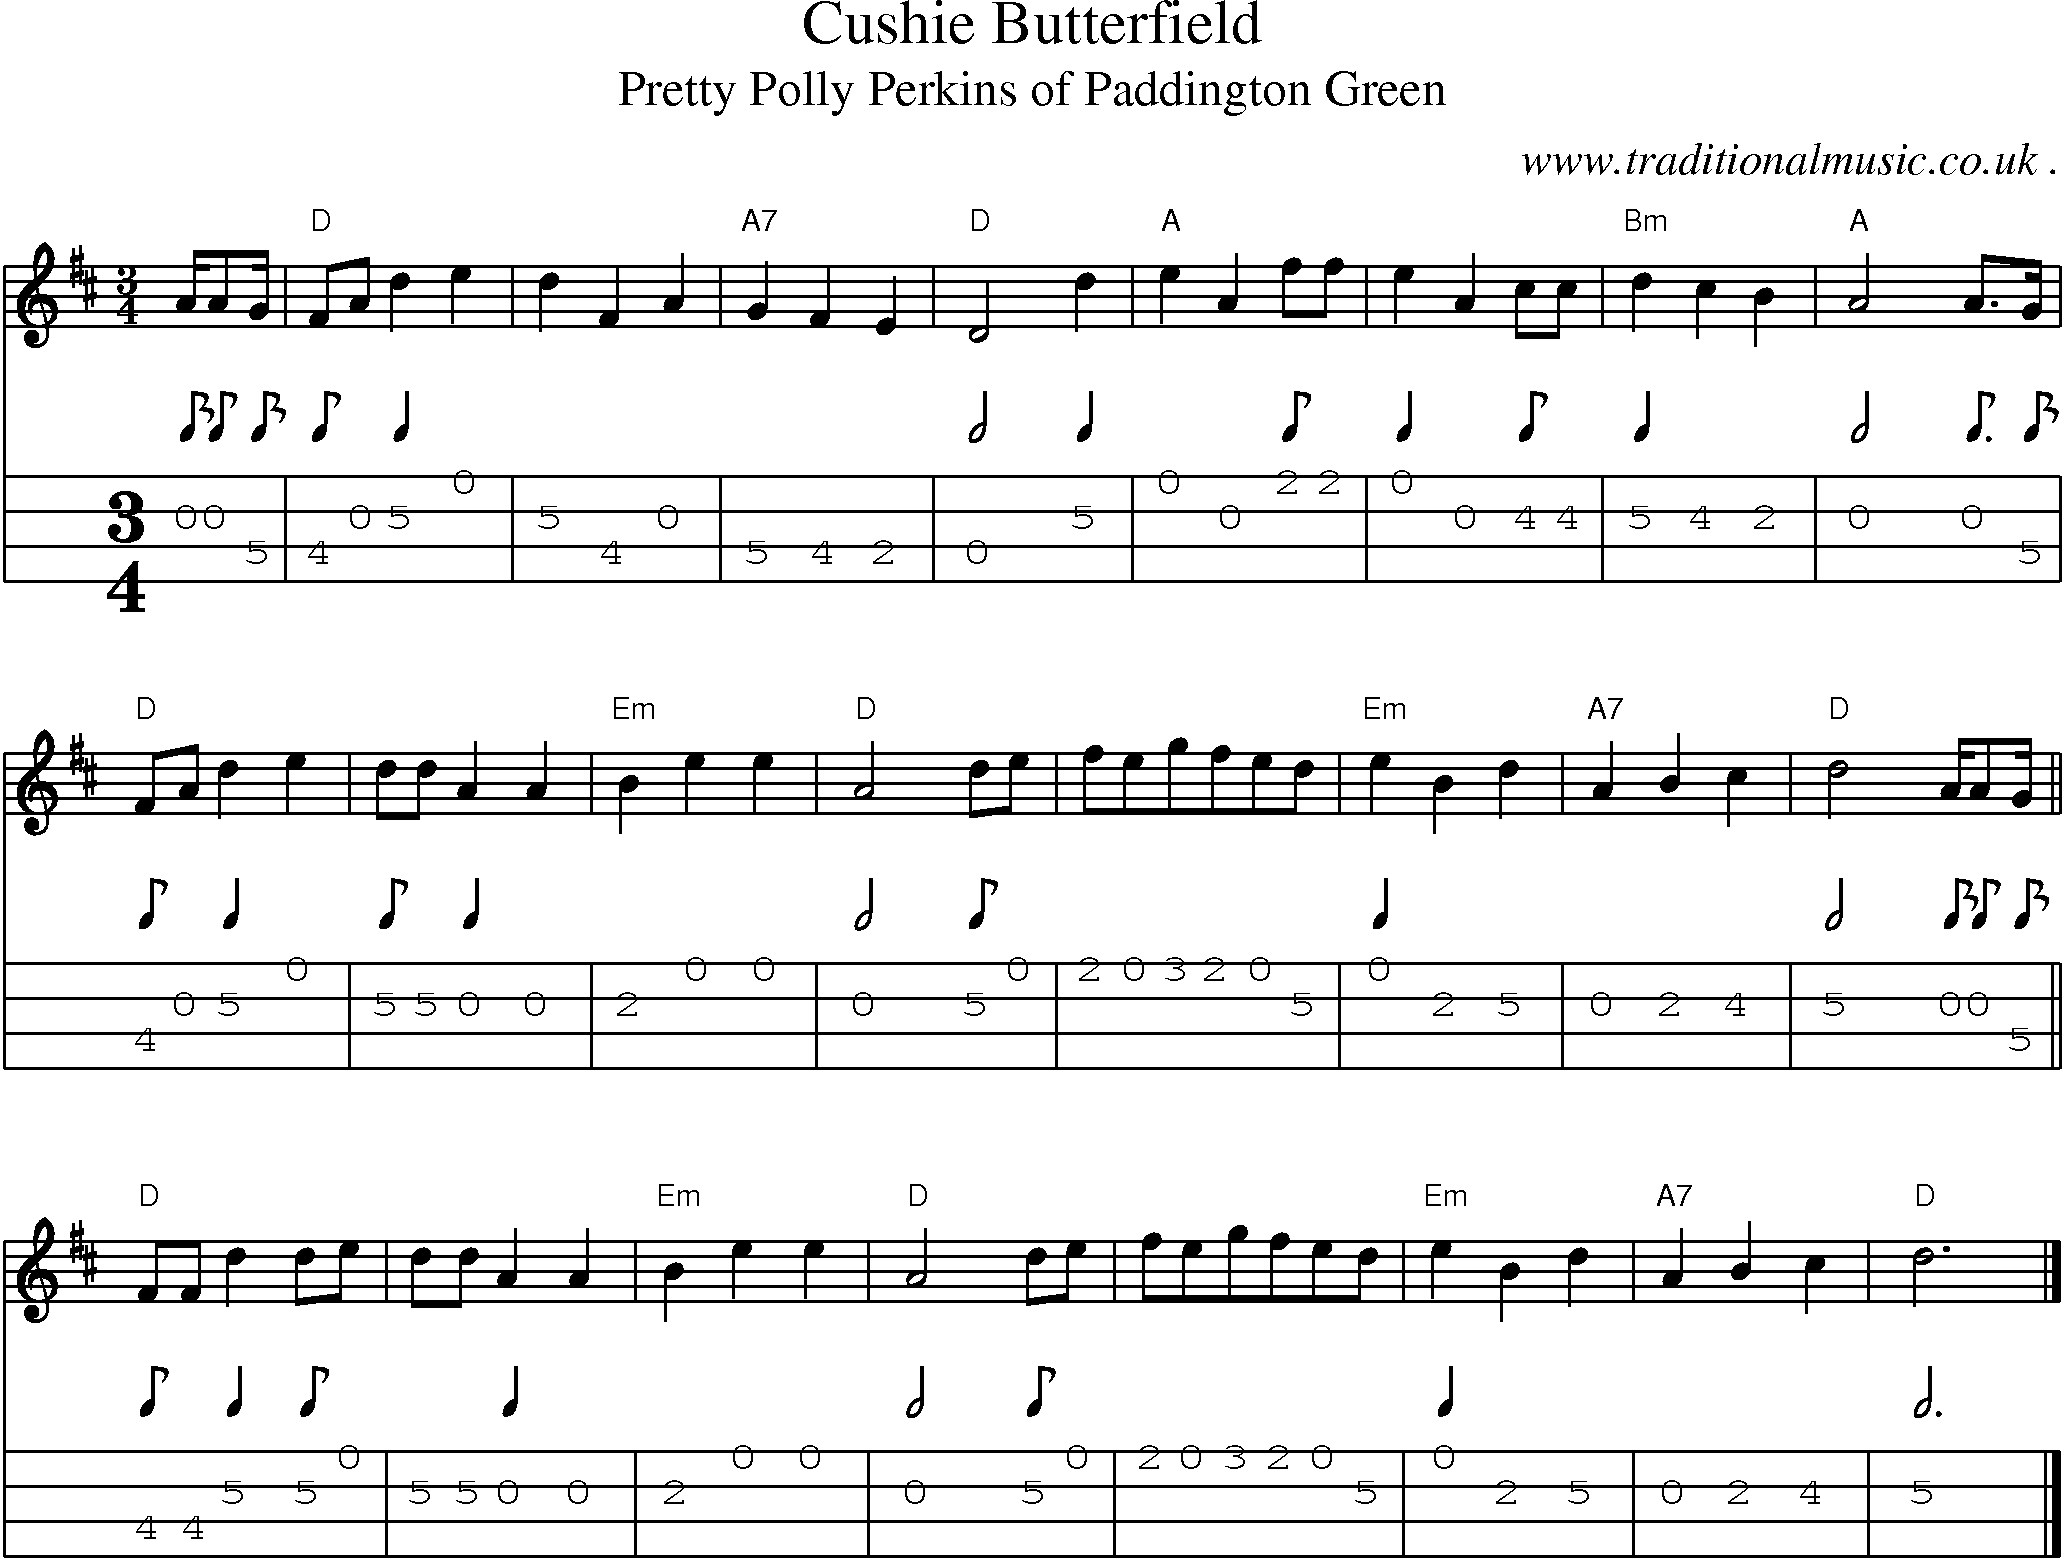 Music Score and Guitar Tabs for Cushie Butterfield